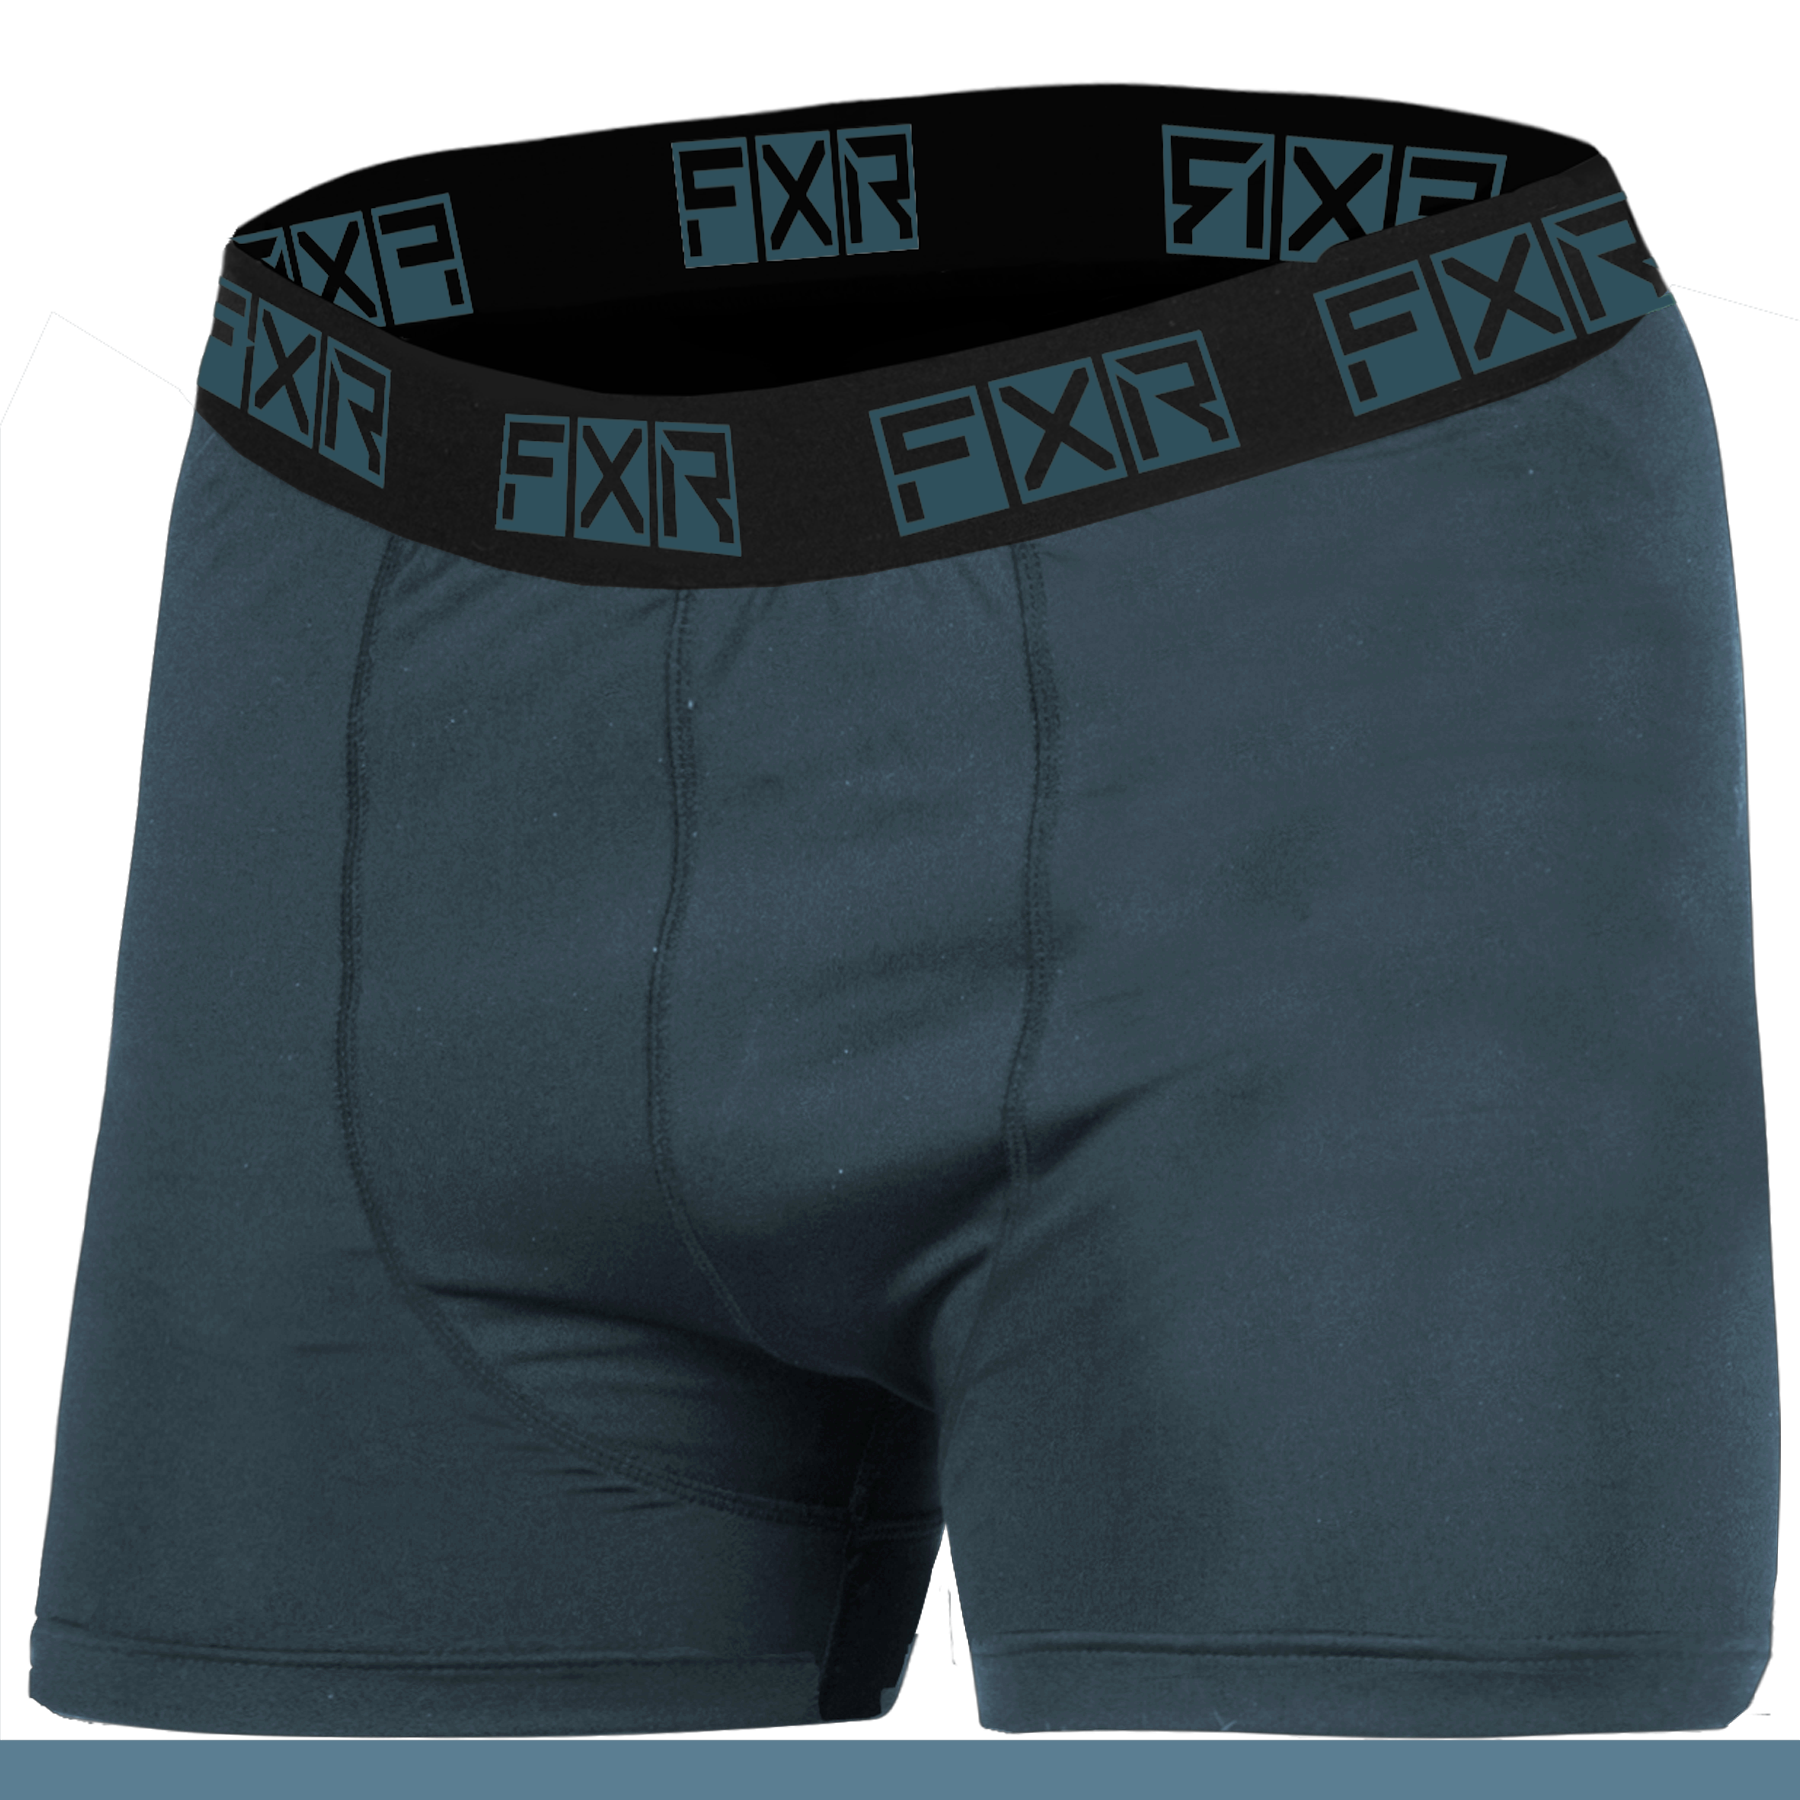 fxr racing bottoms baselayers for men atmosphere boxer brief